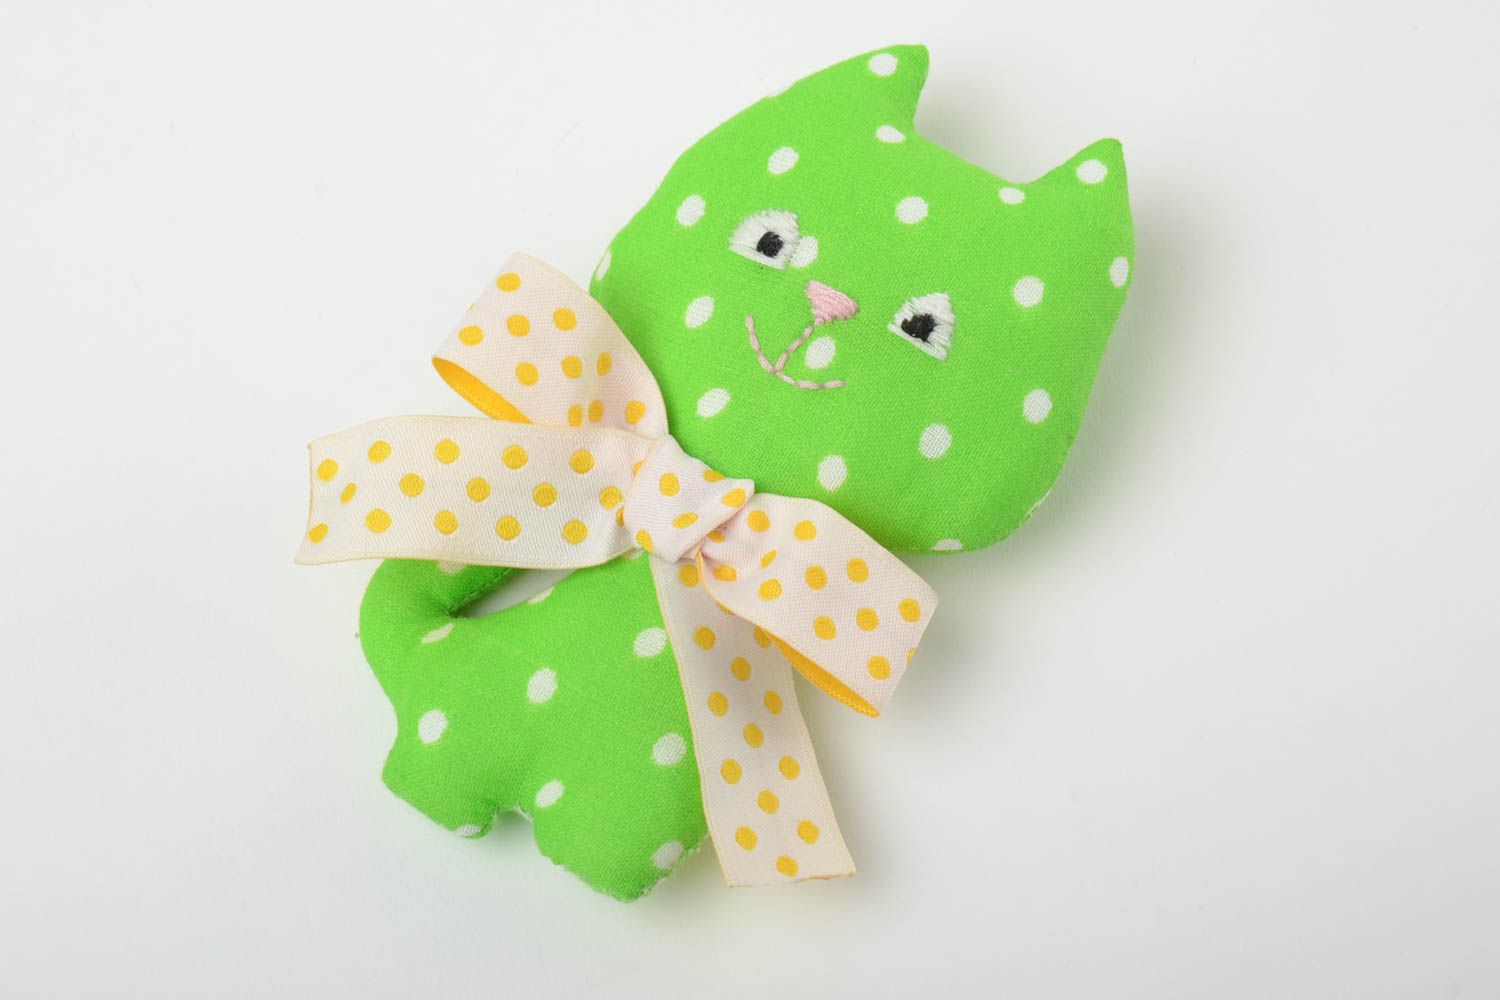 Handmade decorative calico soft toy little green cat with polka dot pattern photo 2